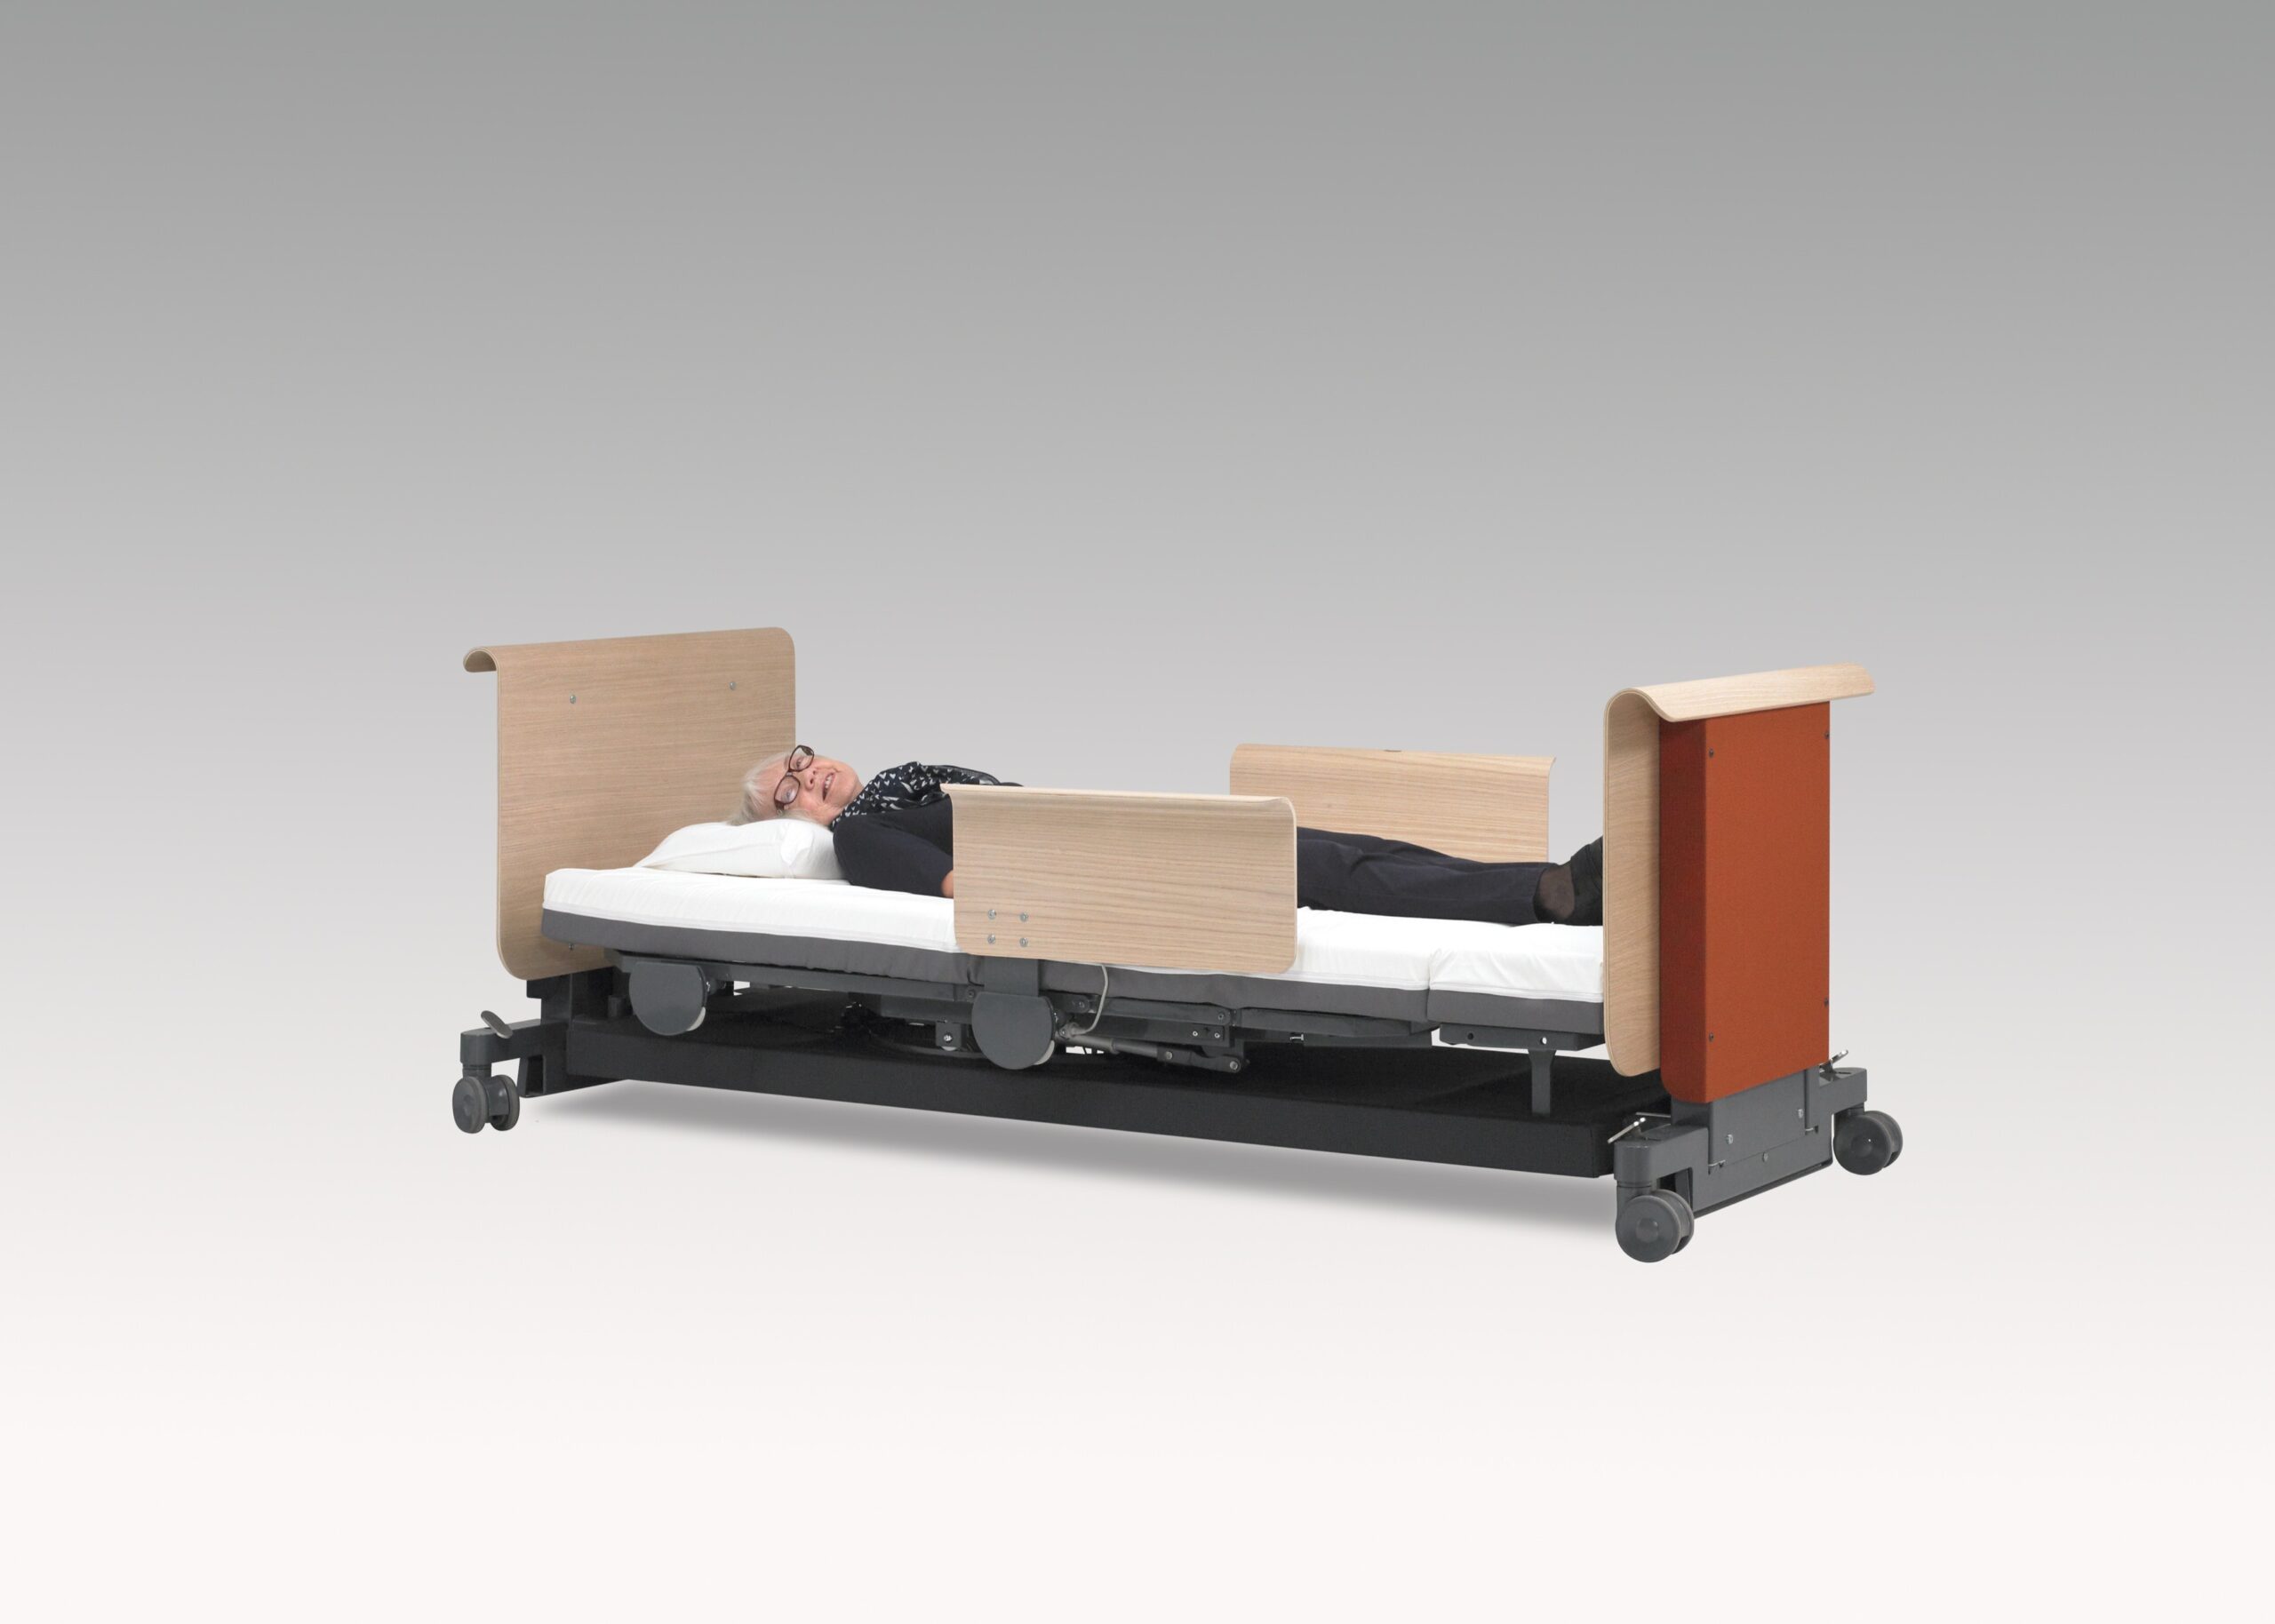 Pivot bed RotoBed care bed